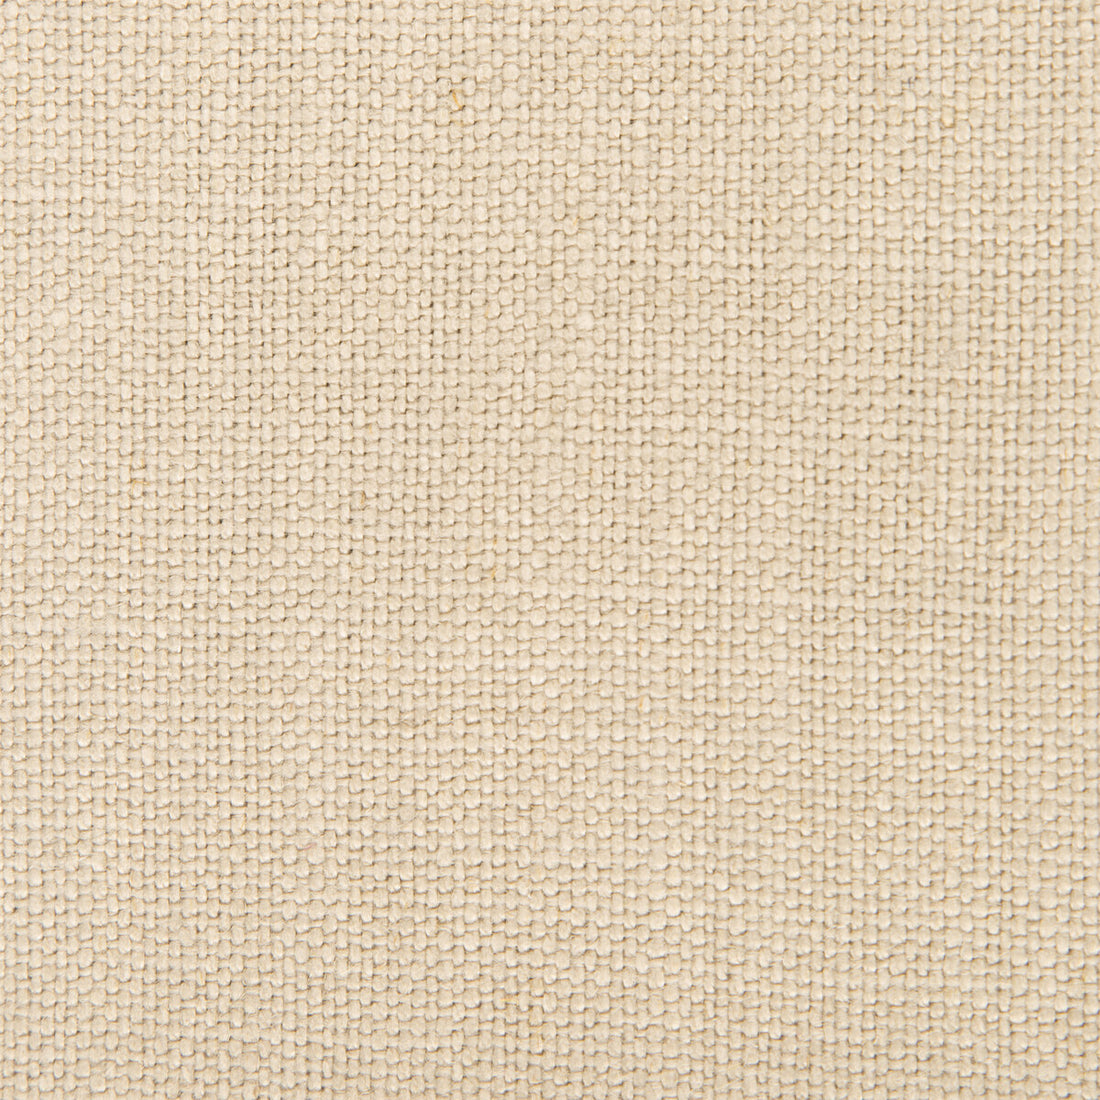 Nicaragua fabric in lino color - pattern GDT5239.023.0 - by Gaston y Daniela in the Basics collection